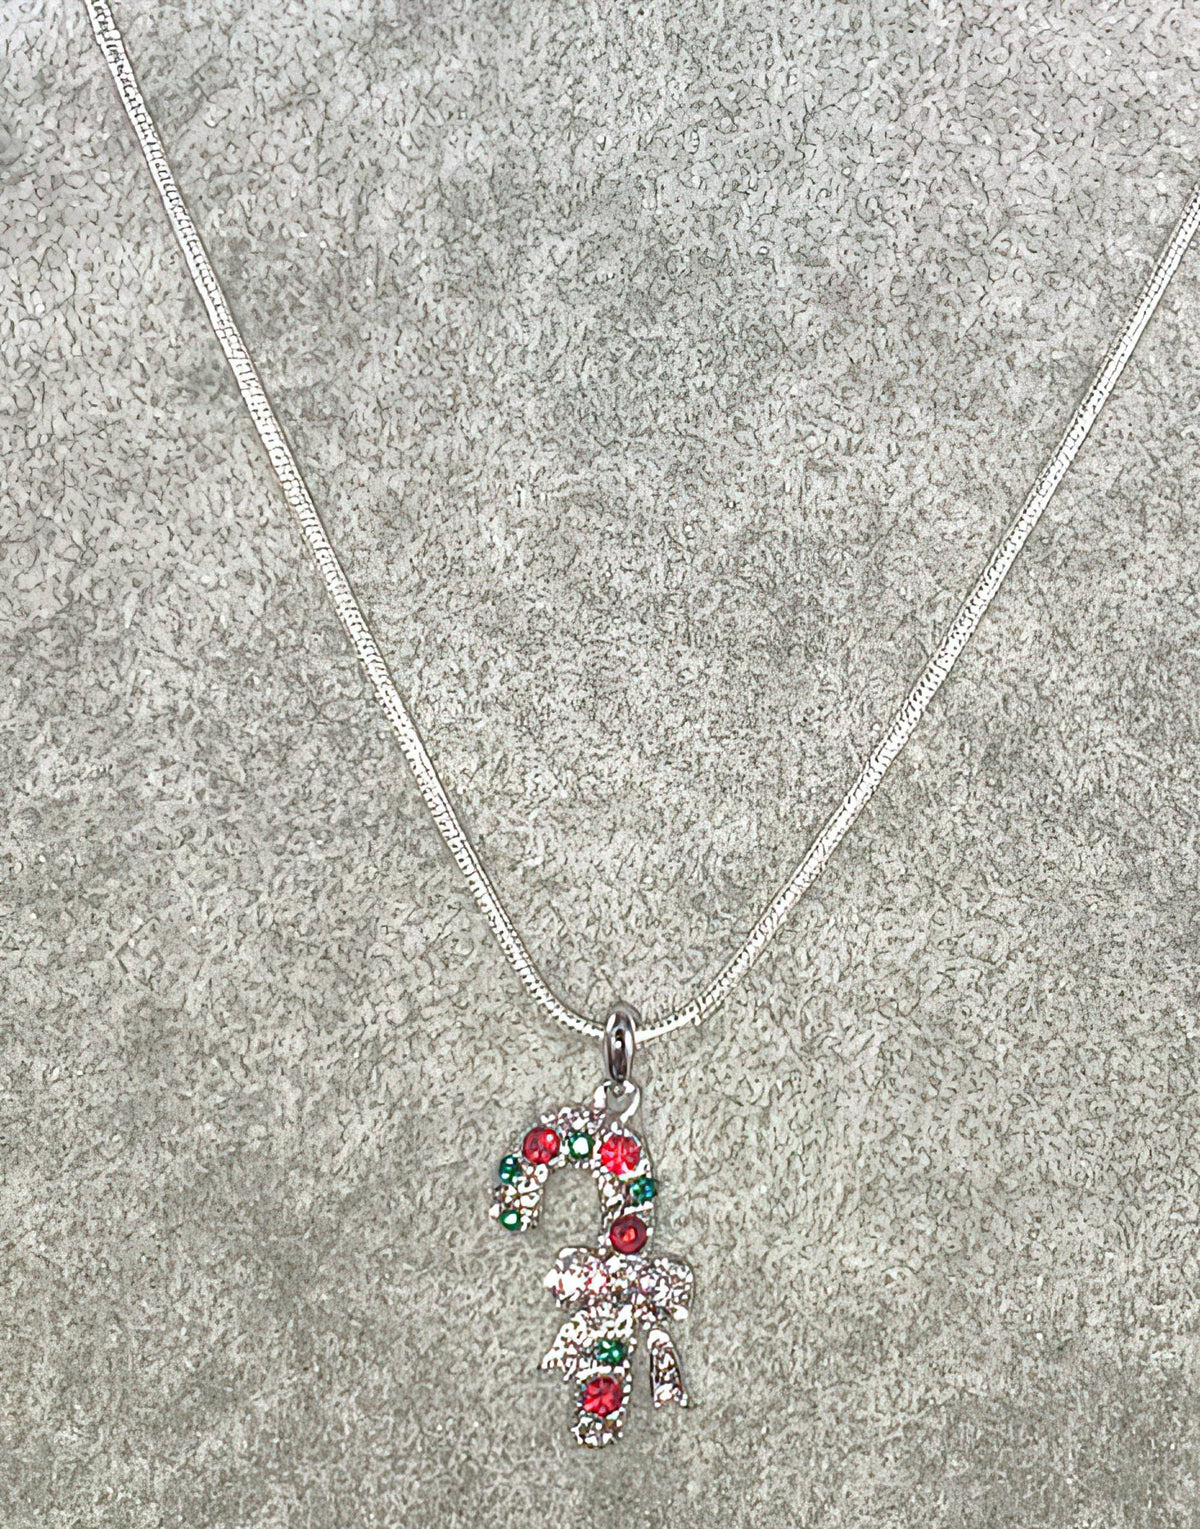 christmas necklace